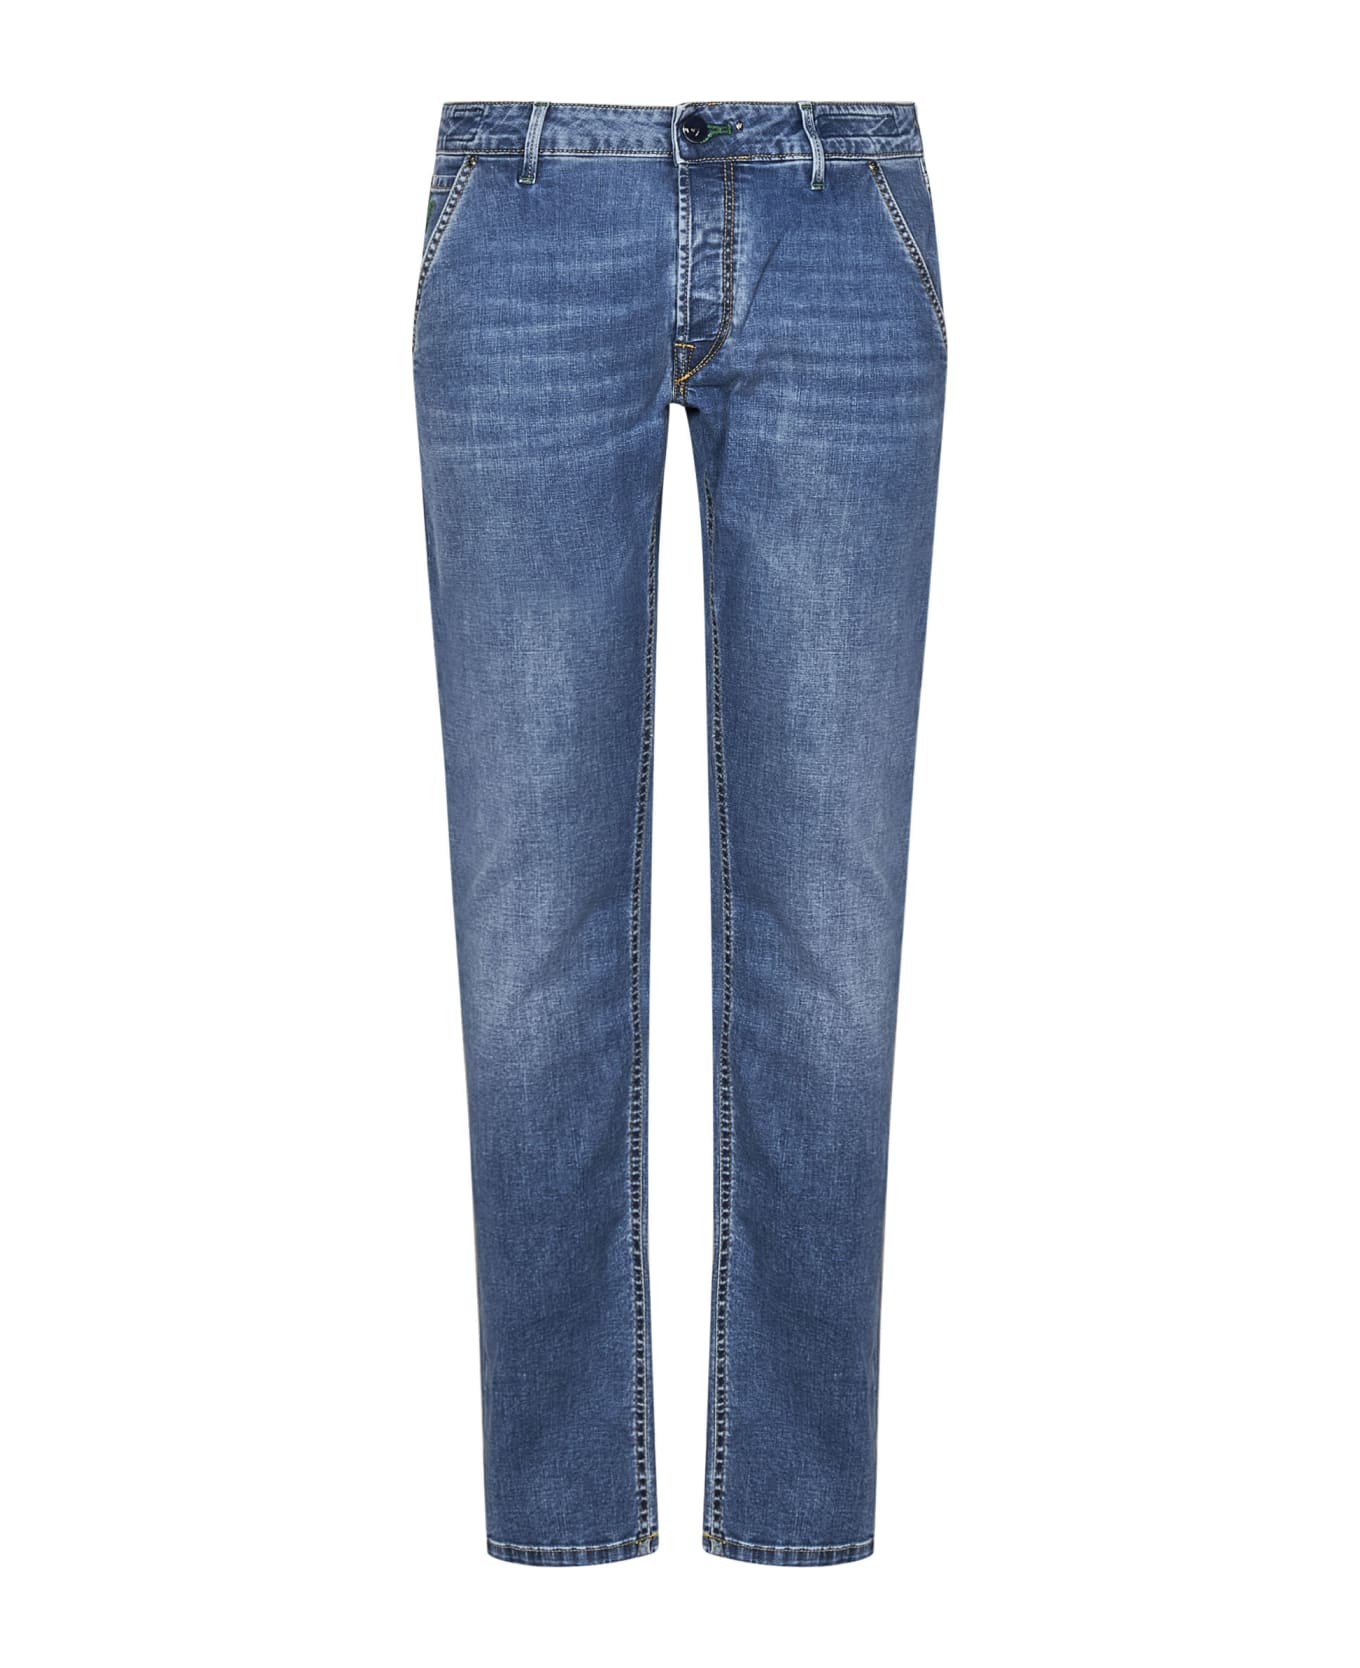 Hand Picked Handpicked Parma Jeans - Blue